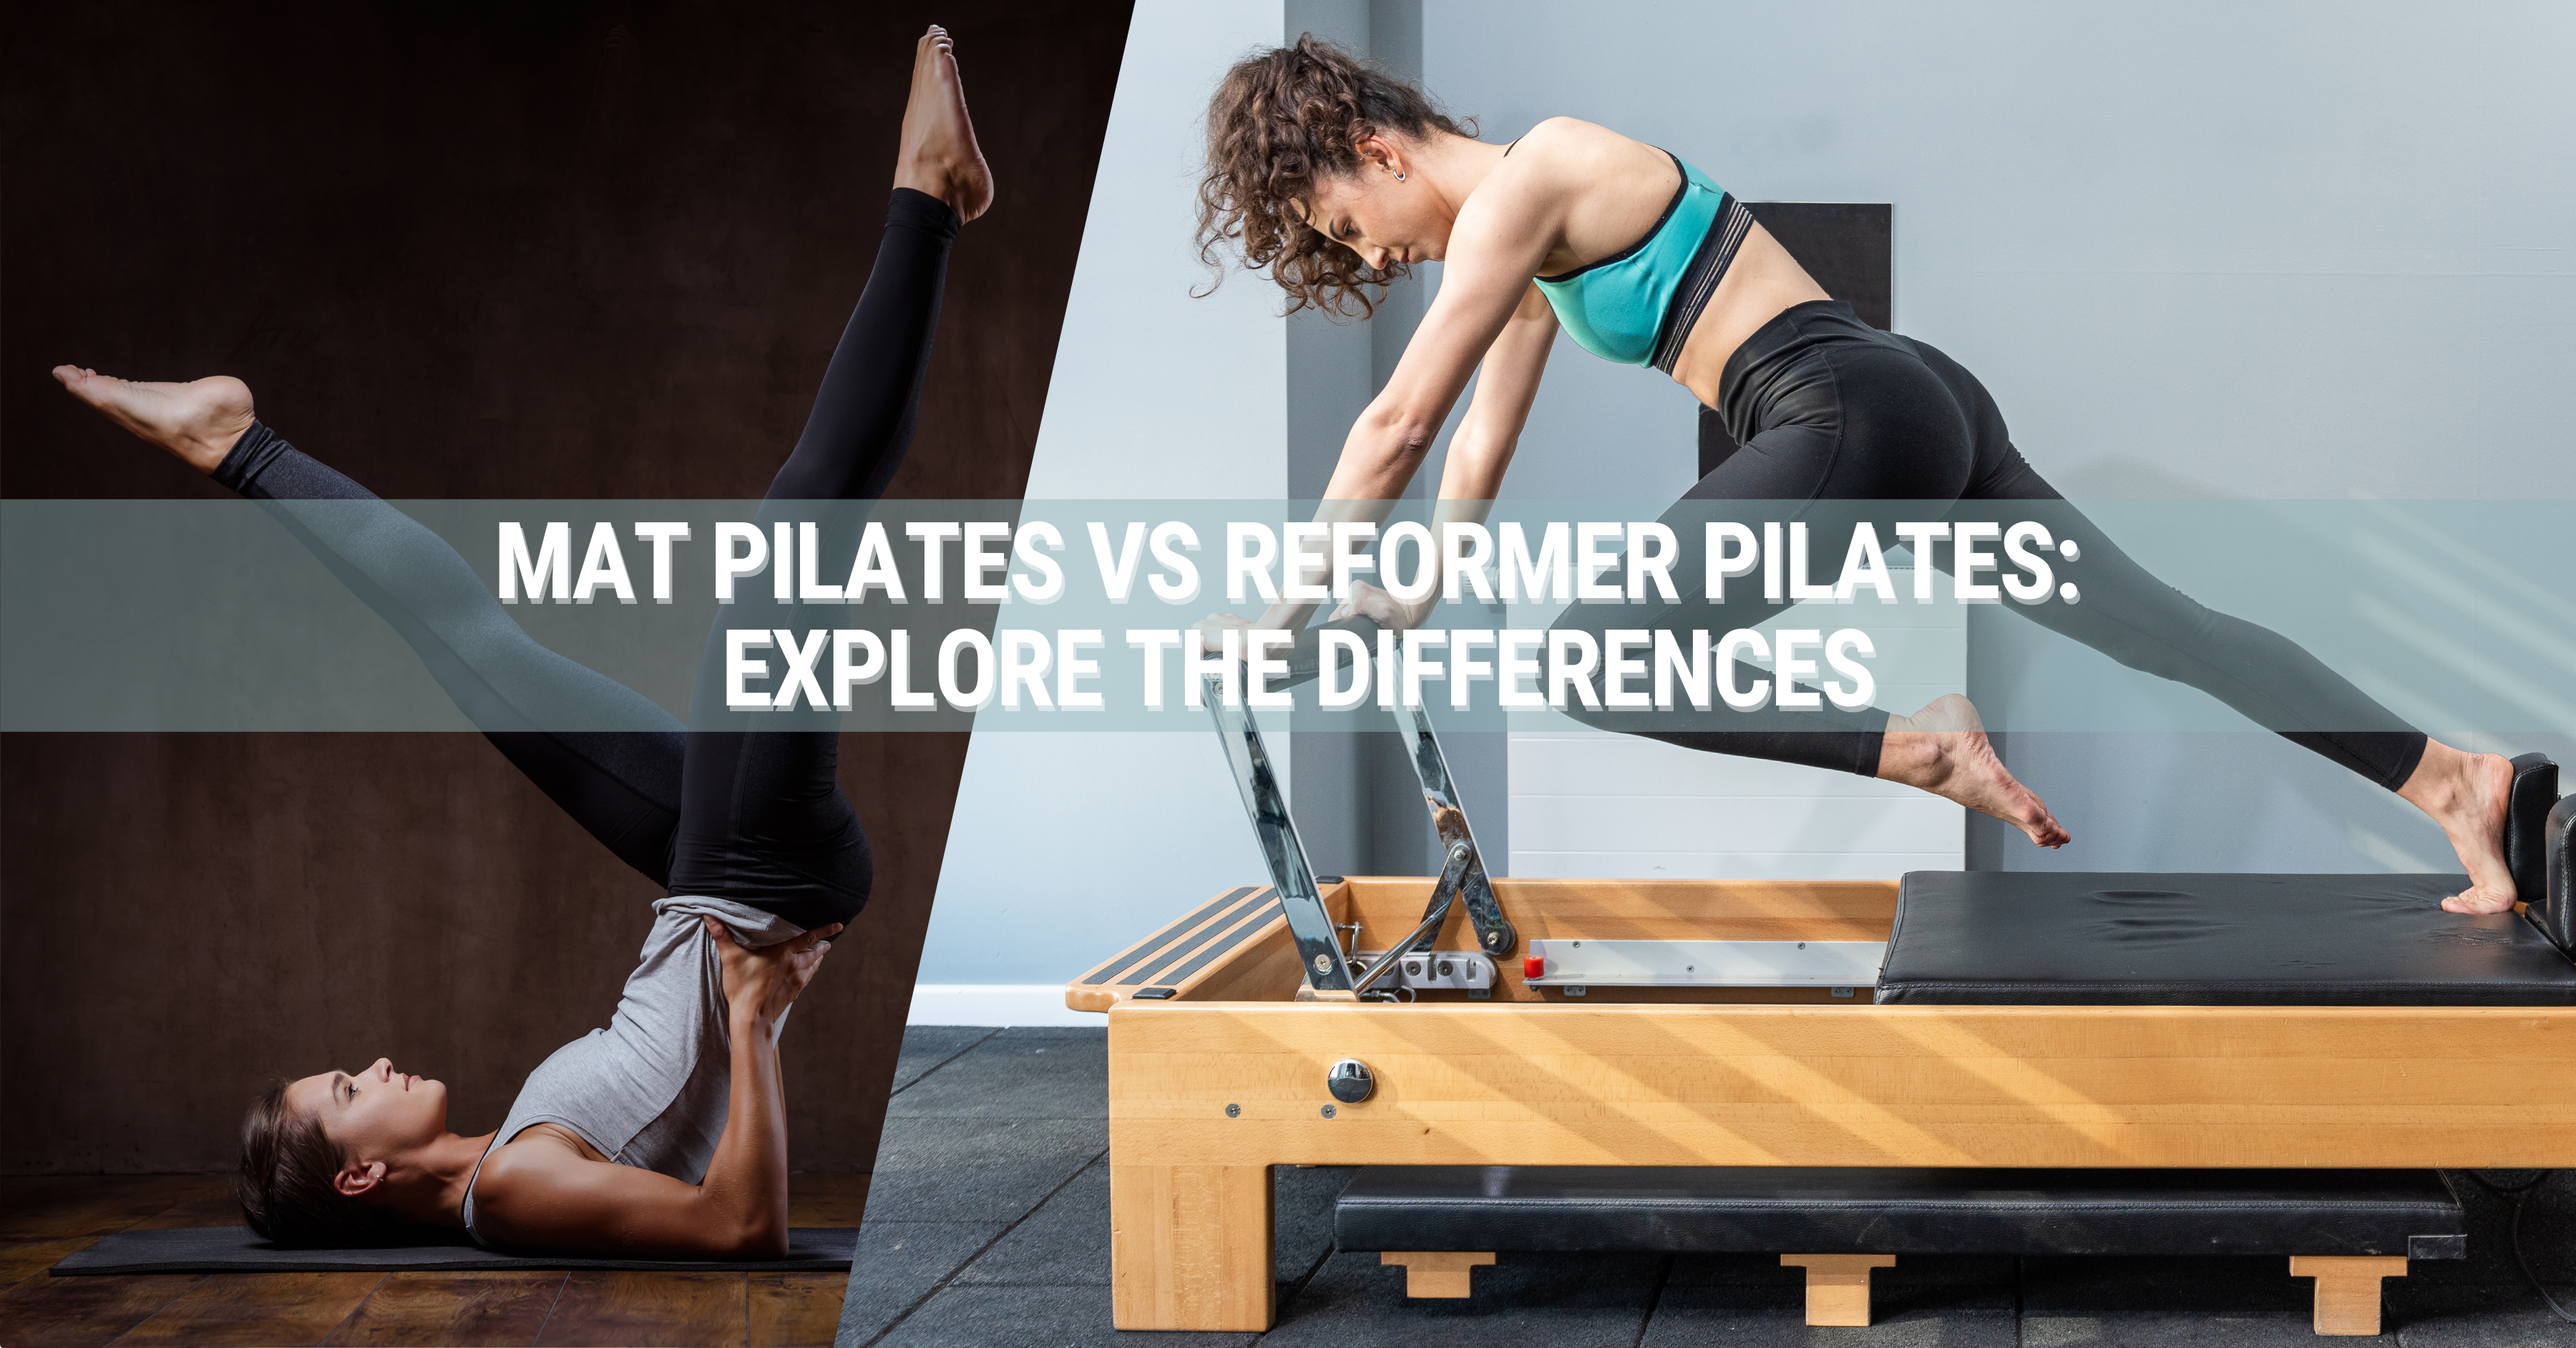 Reformer or Mat Pilates: What's the Better Workout? - POPSUGAR